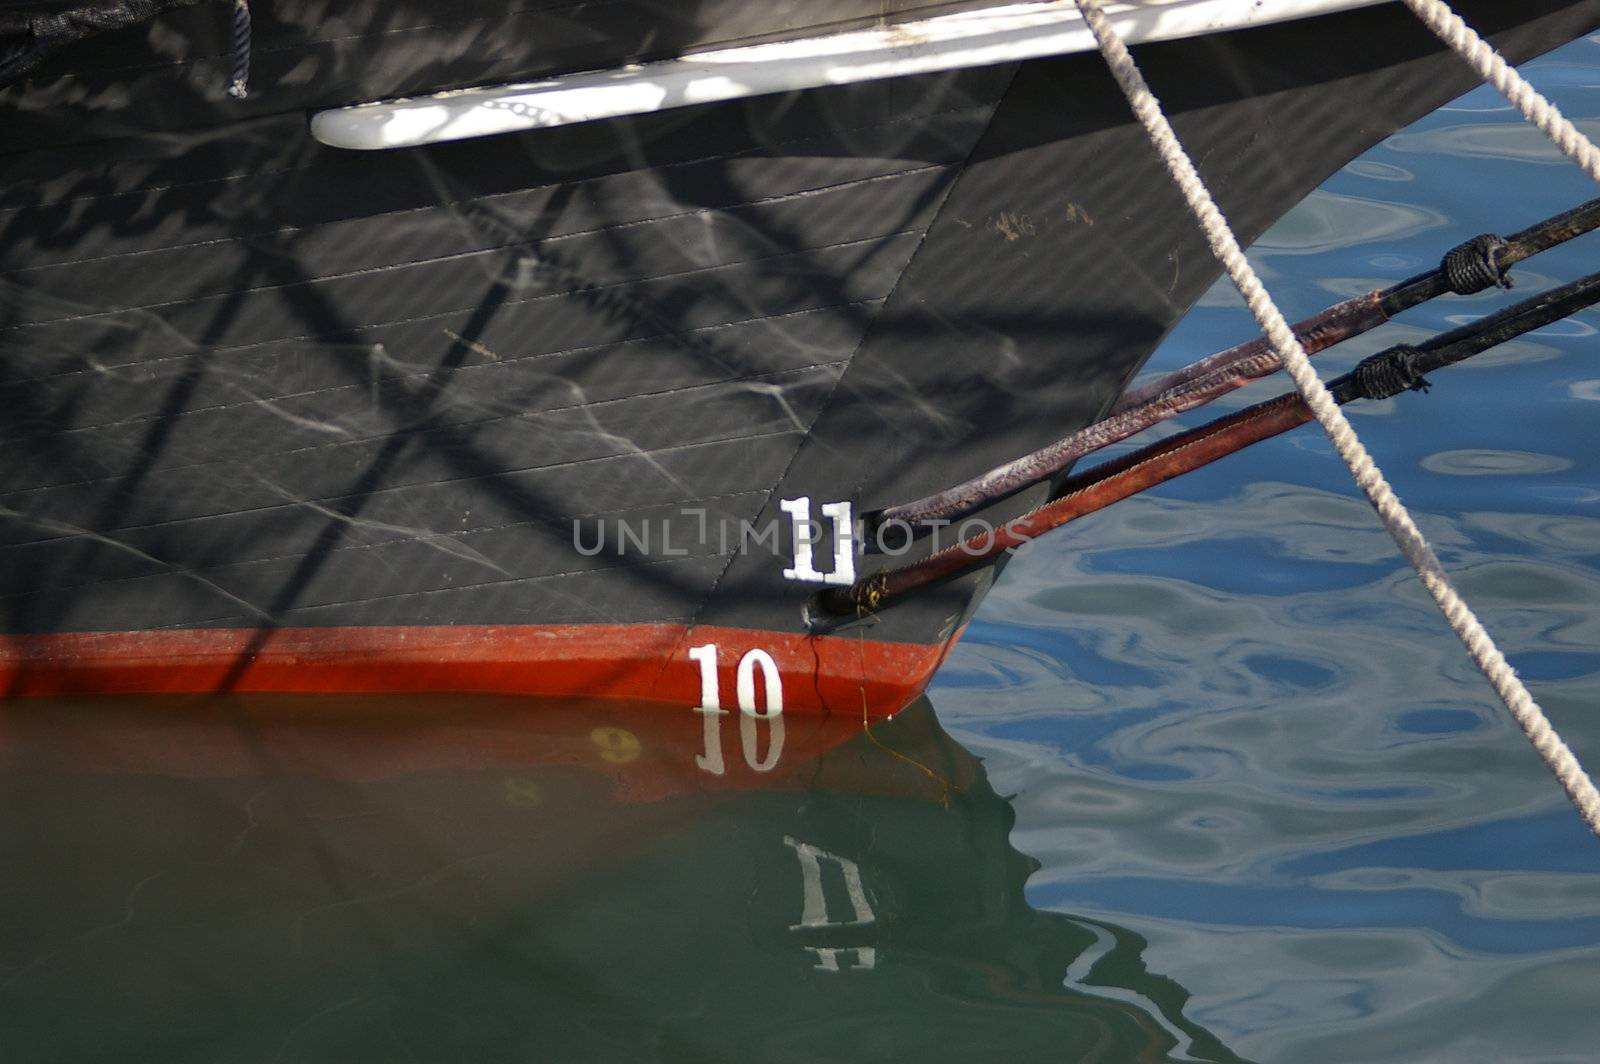 A close up of ships bow showing rigging and water depth.